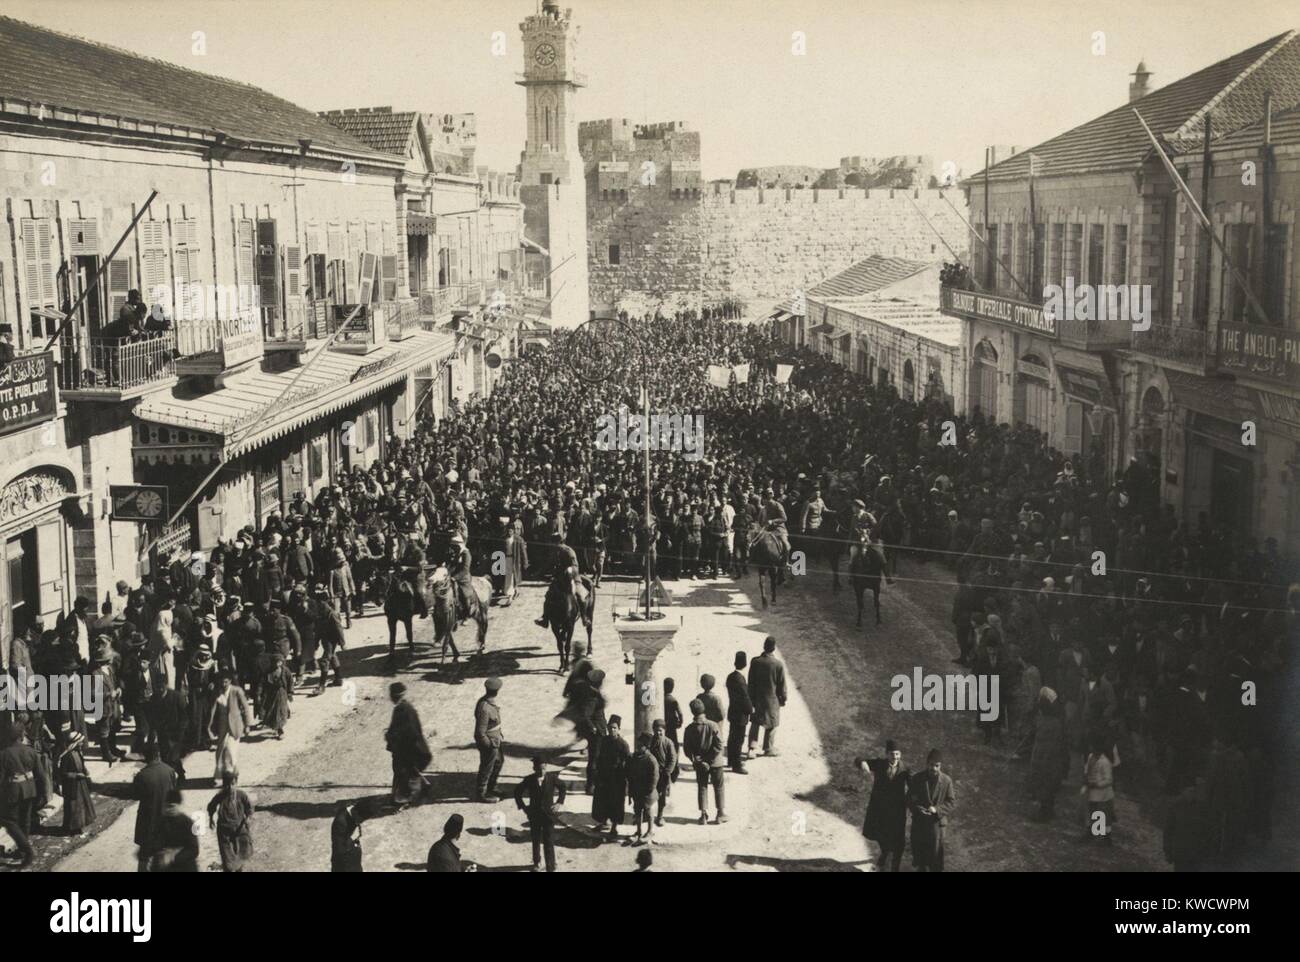 Arab anti-Zionist demonstration leaving Jaffa Gate after Friday prayers in Jerusalem in 1920 (BSLOC 2017 1 190) Stock Photo